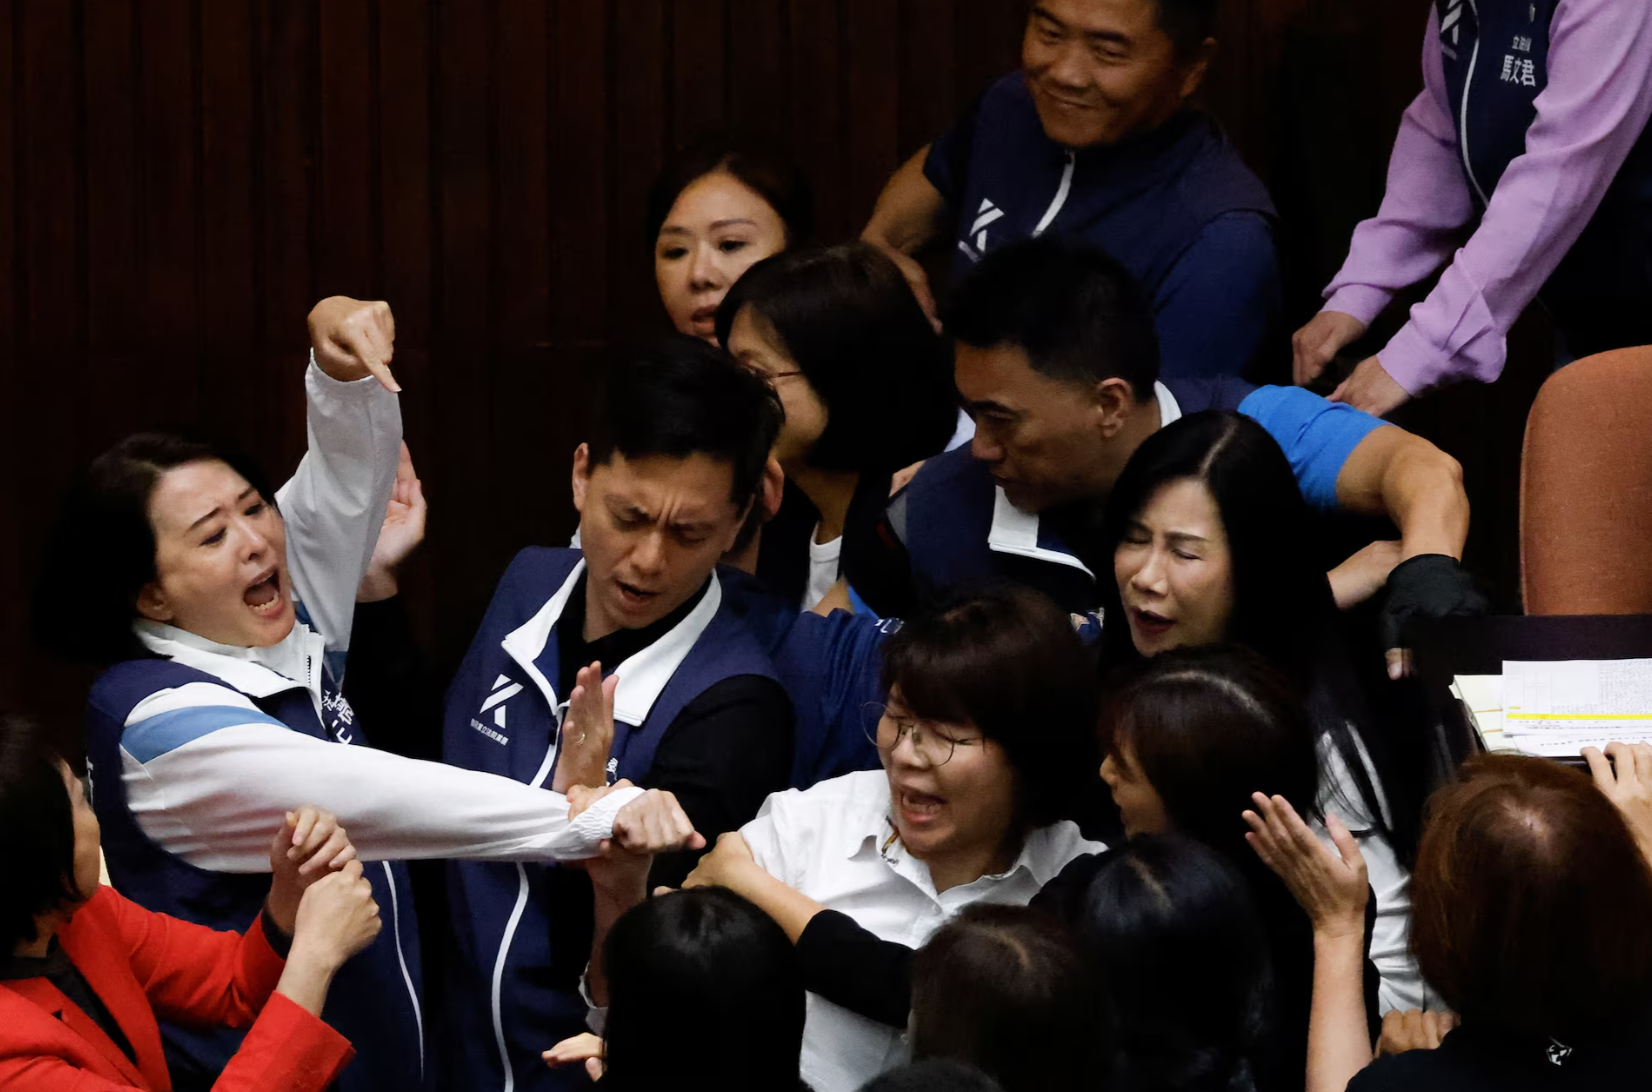 Taiwan lawmakers exchange blows in bitter dispute over parliament reforms